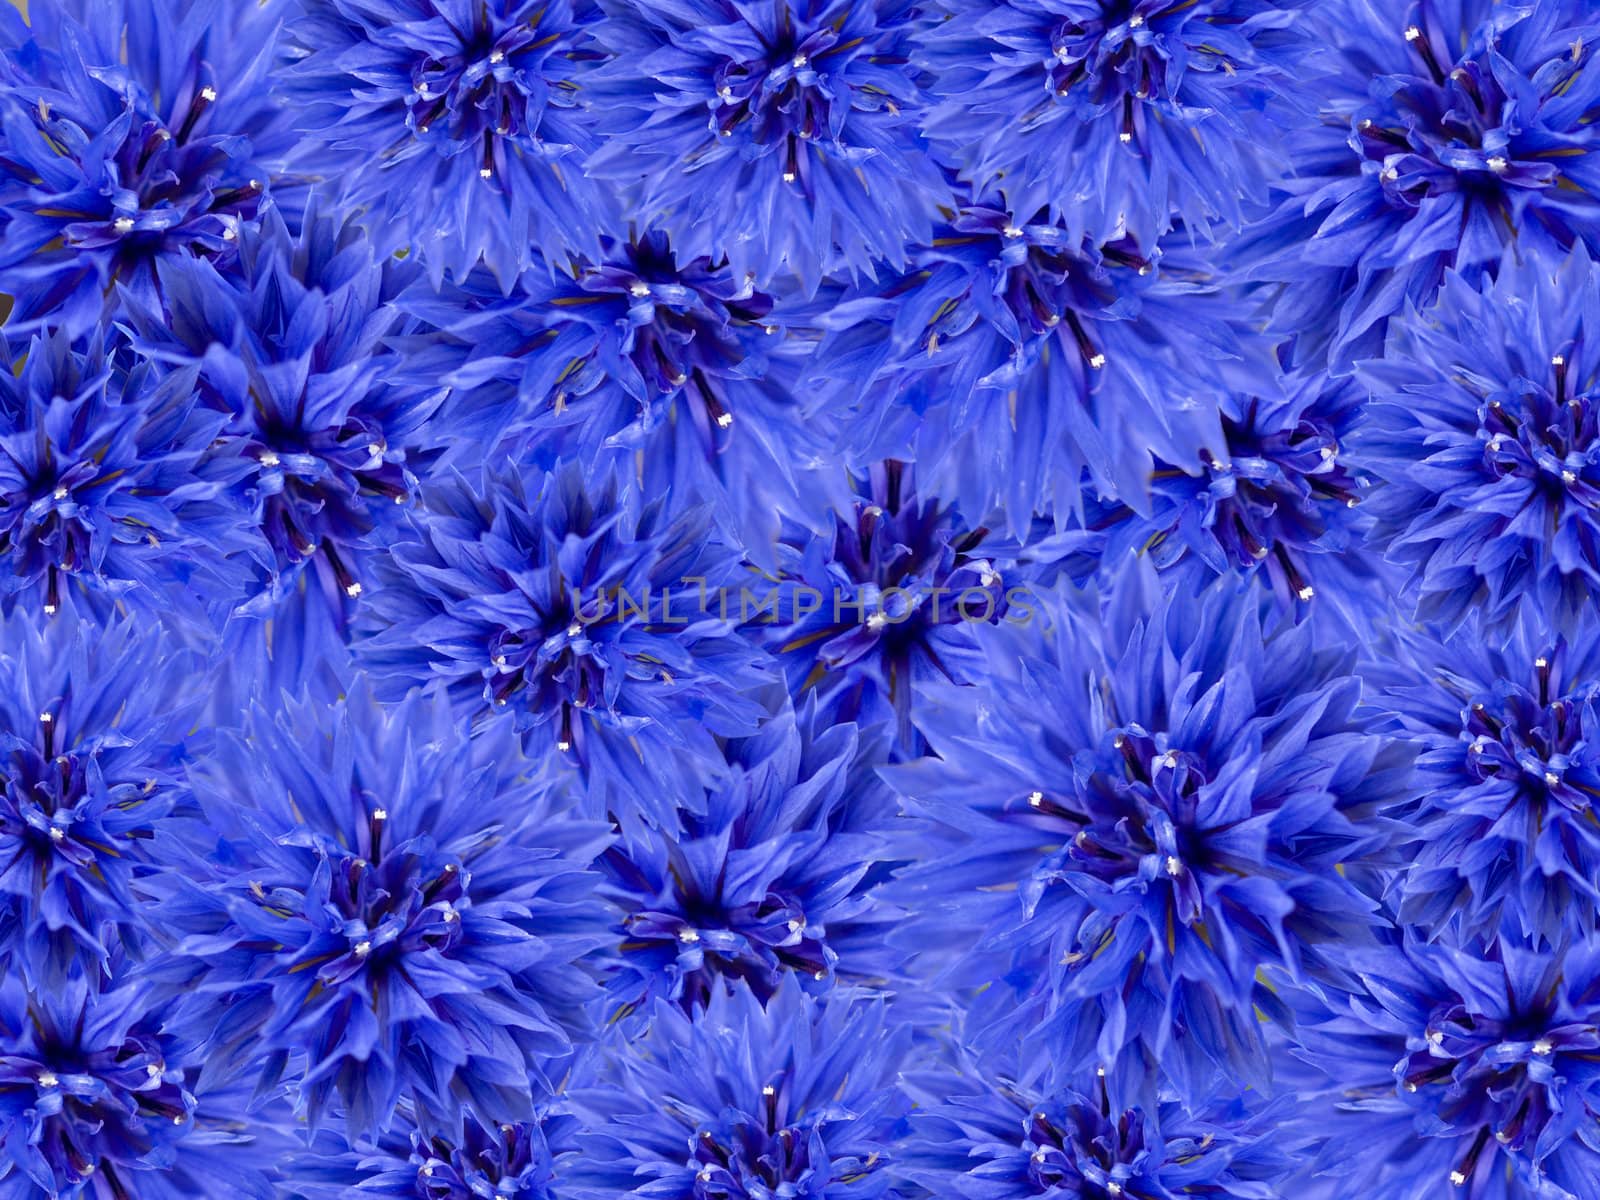 blue spring flowers floral background array of blue cornflowers